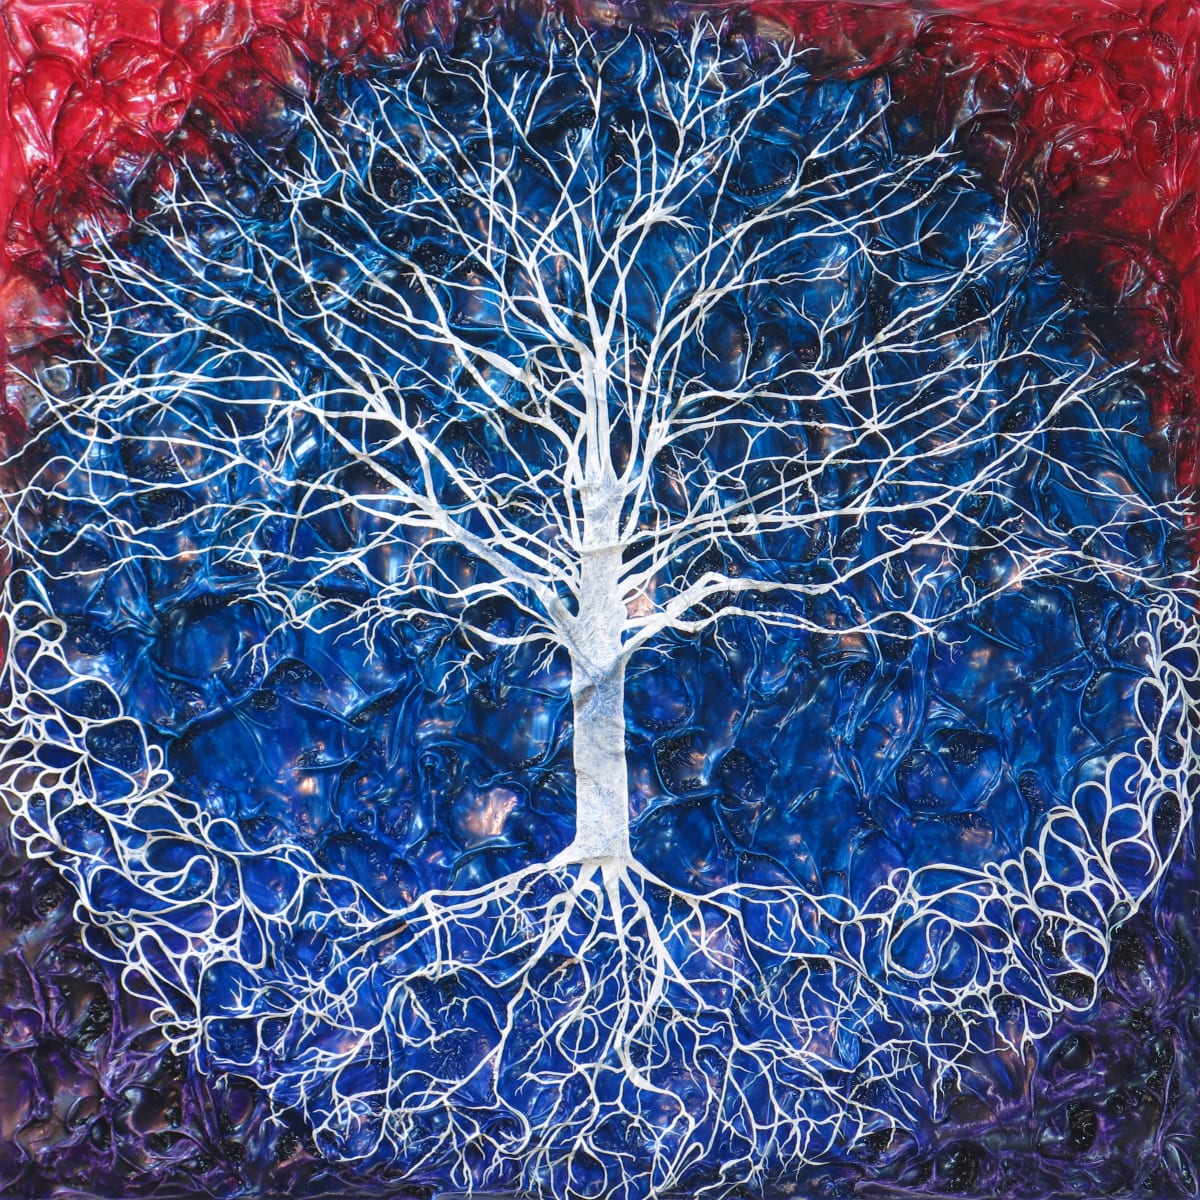 Tree of Life - Framed to 16x16" by Jennifer Brewer Stone 